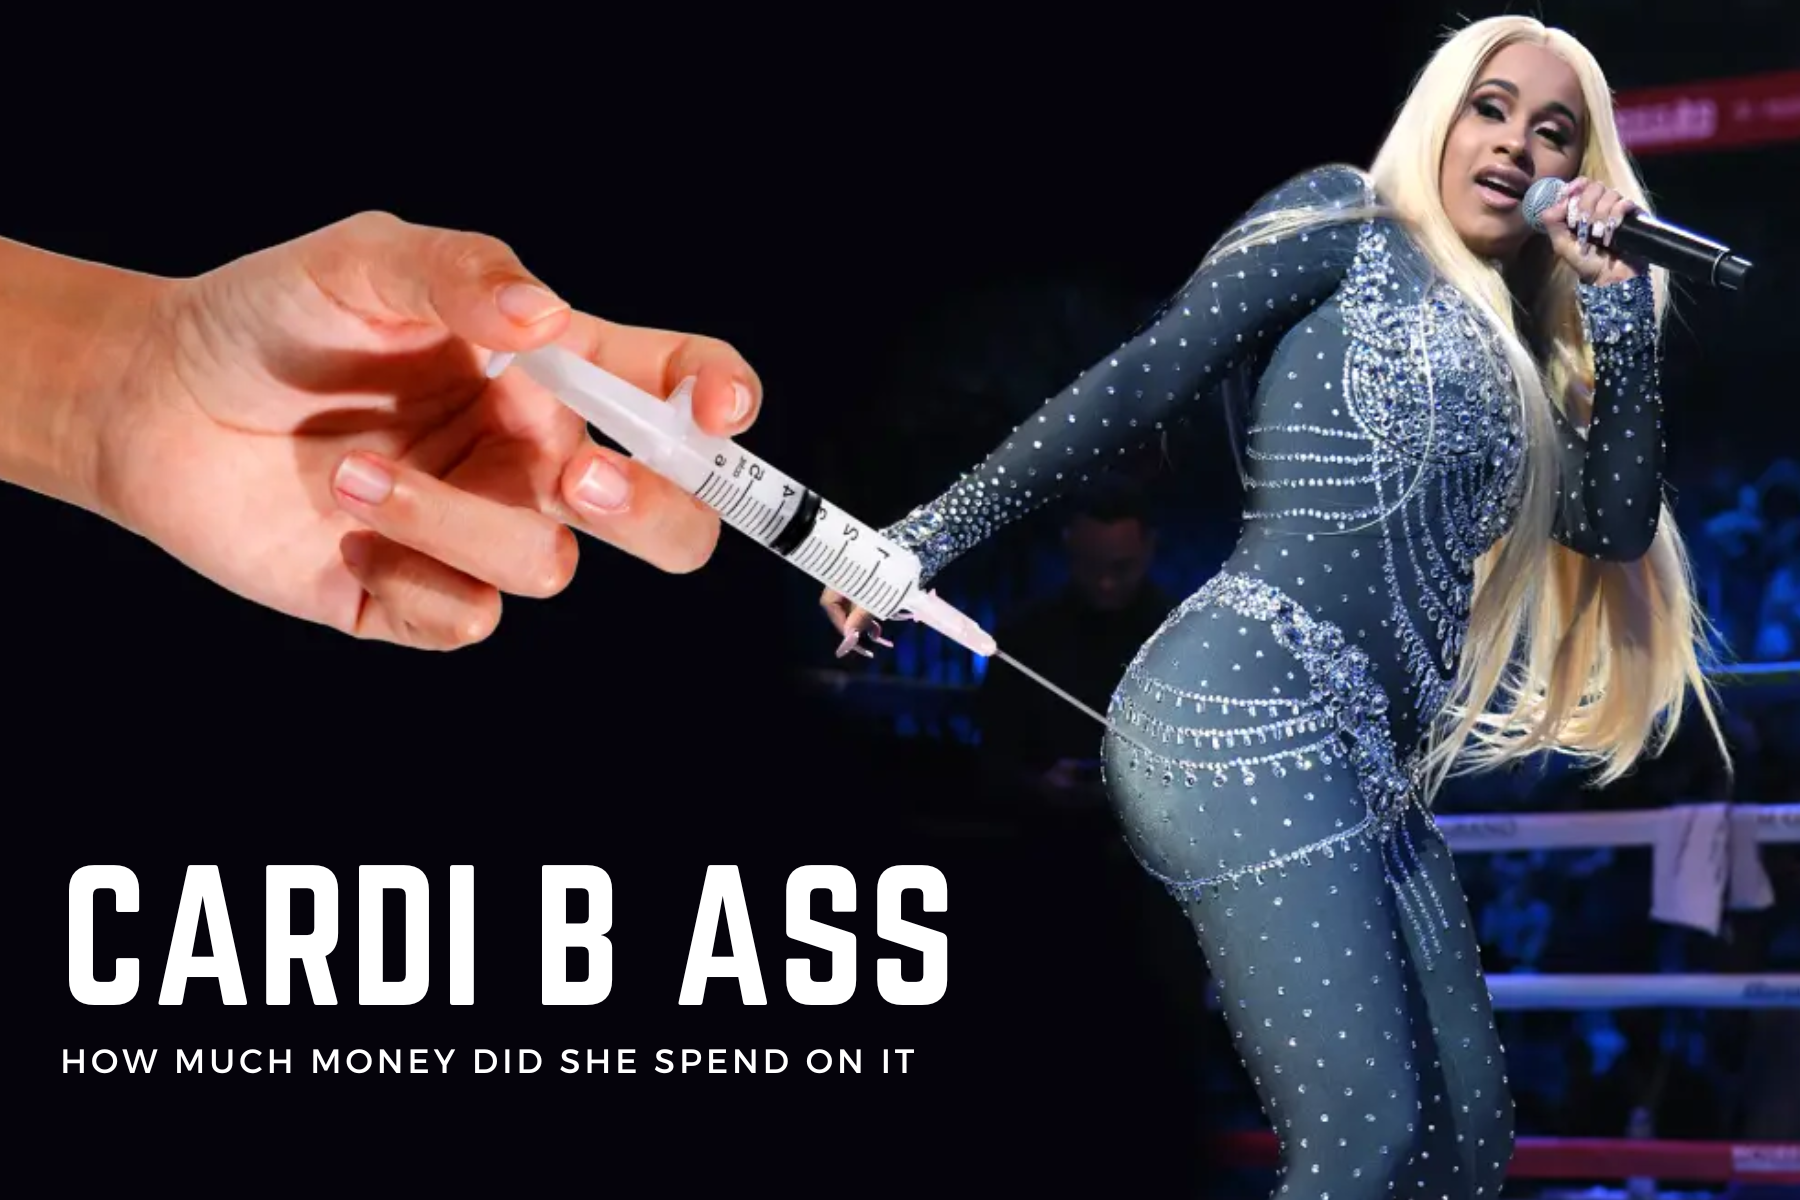 Cardi B Ass - How Much Money Did She Spend On It